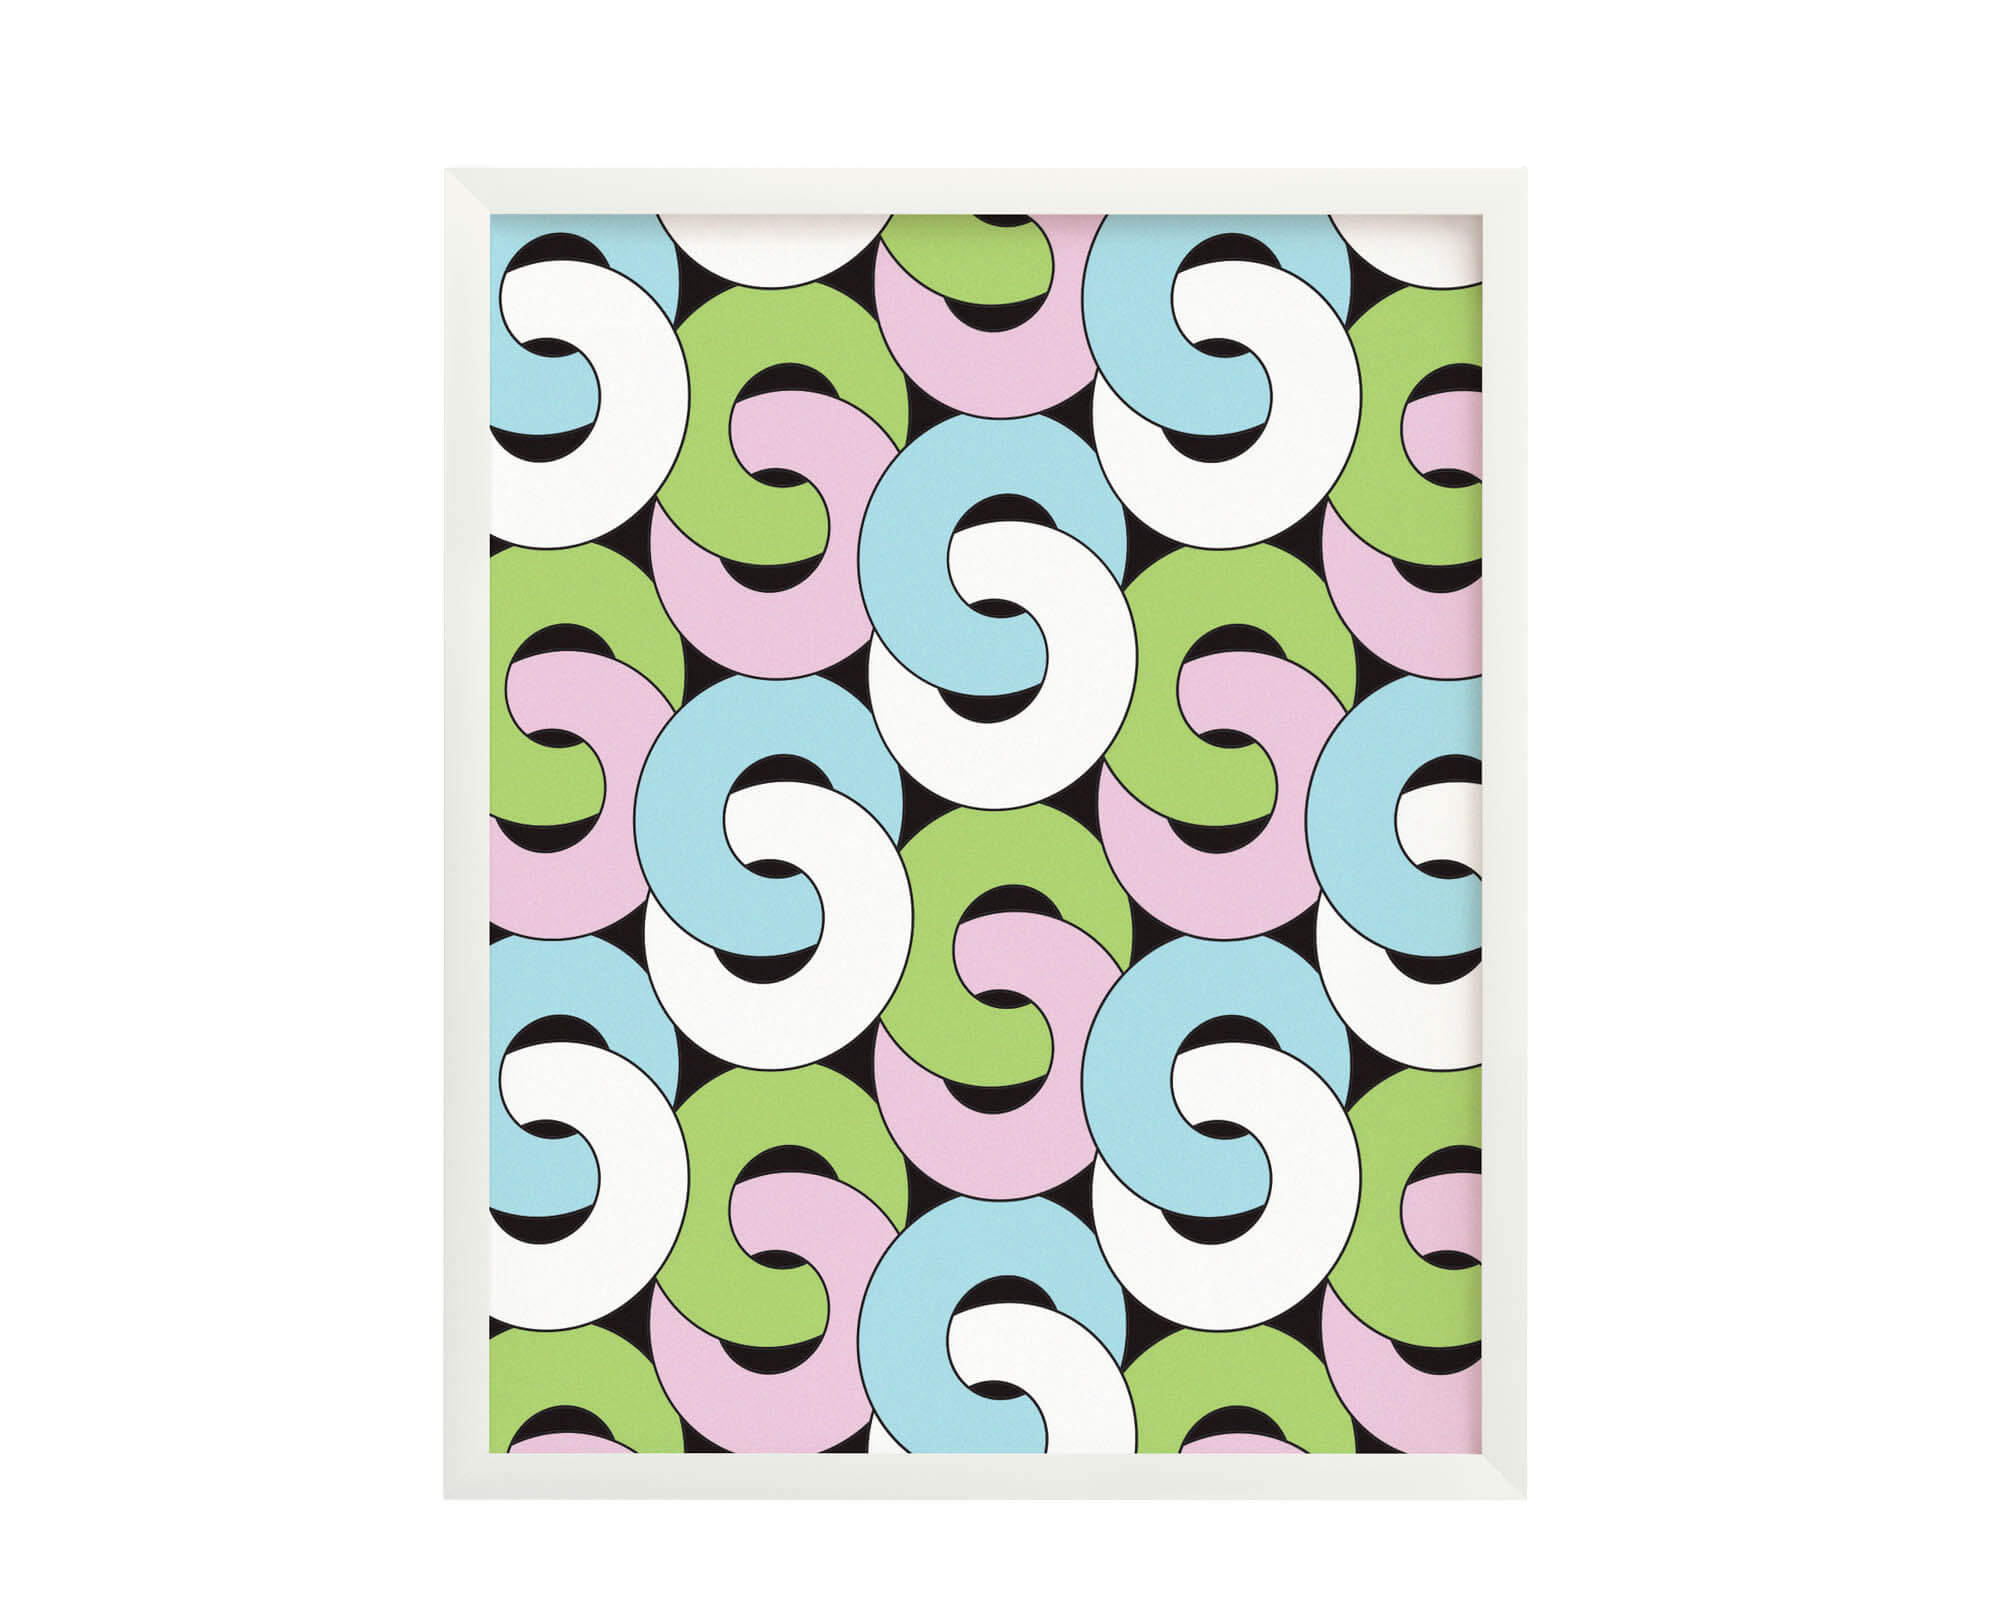 Mod linked rings archival giclée graphic art print. Made in USA by My Darlin' @mydarlin_bk